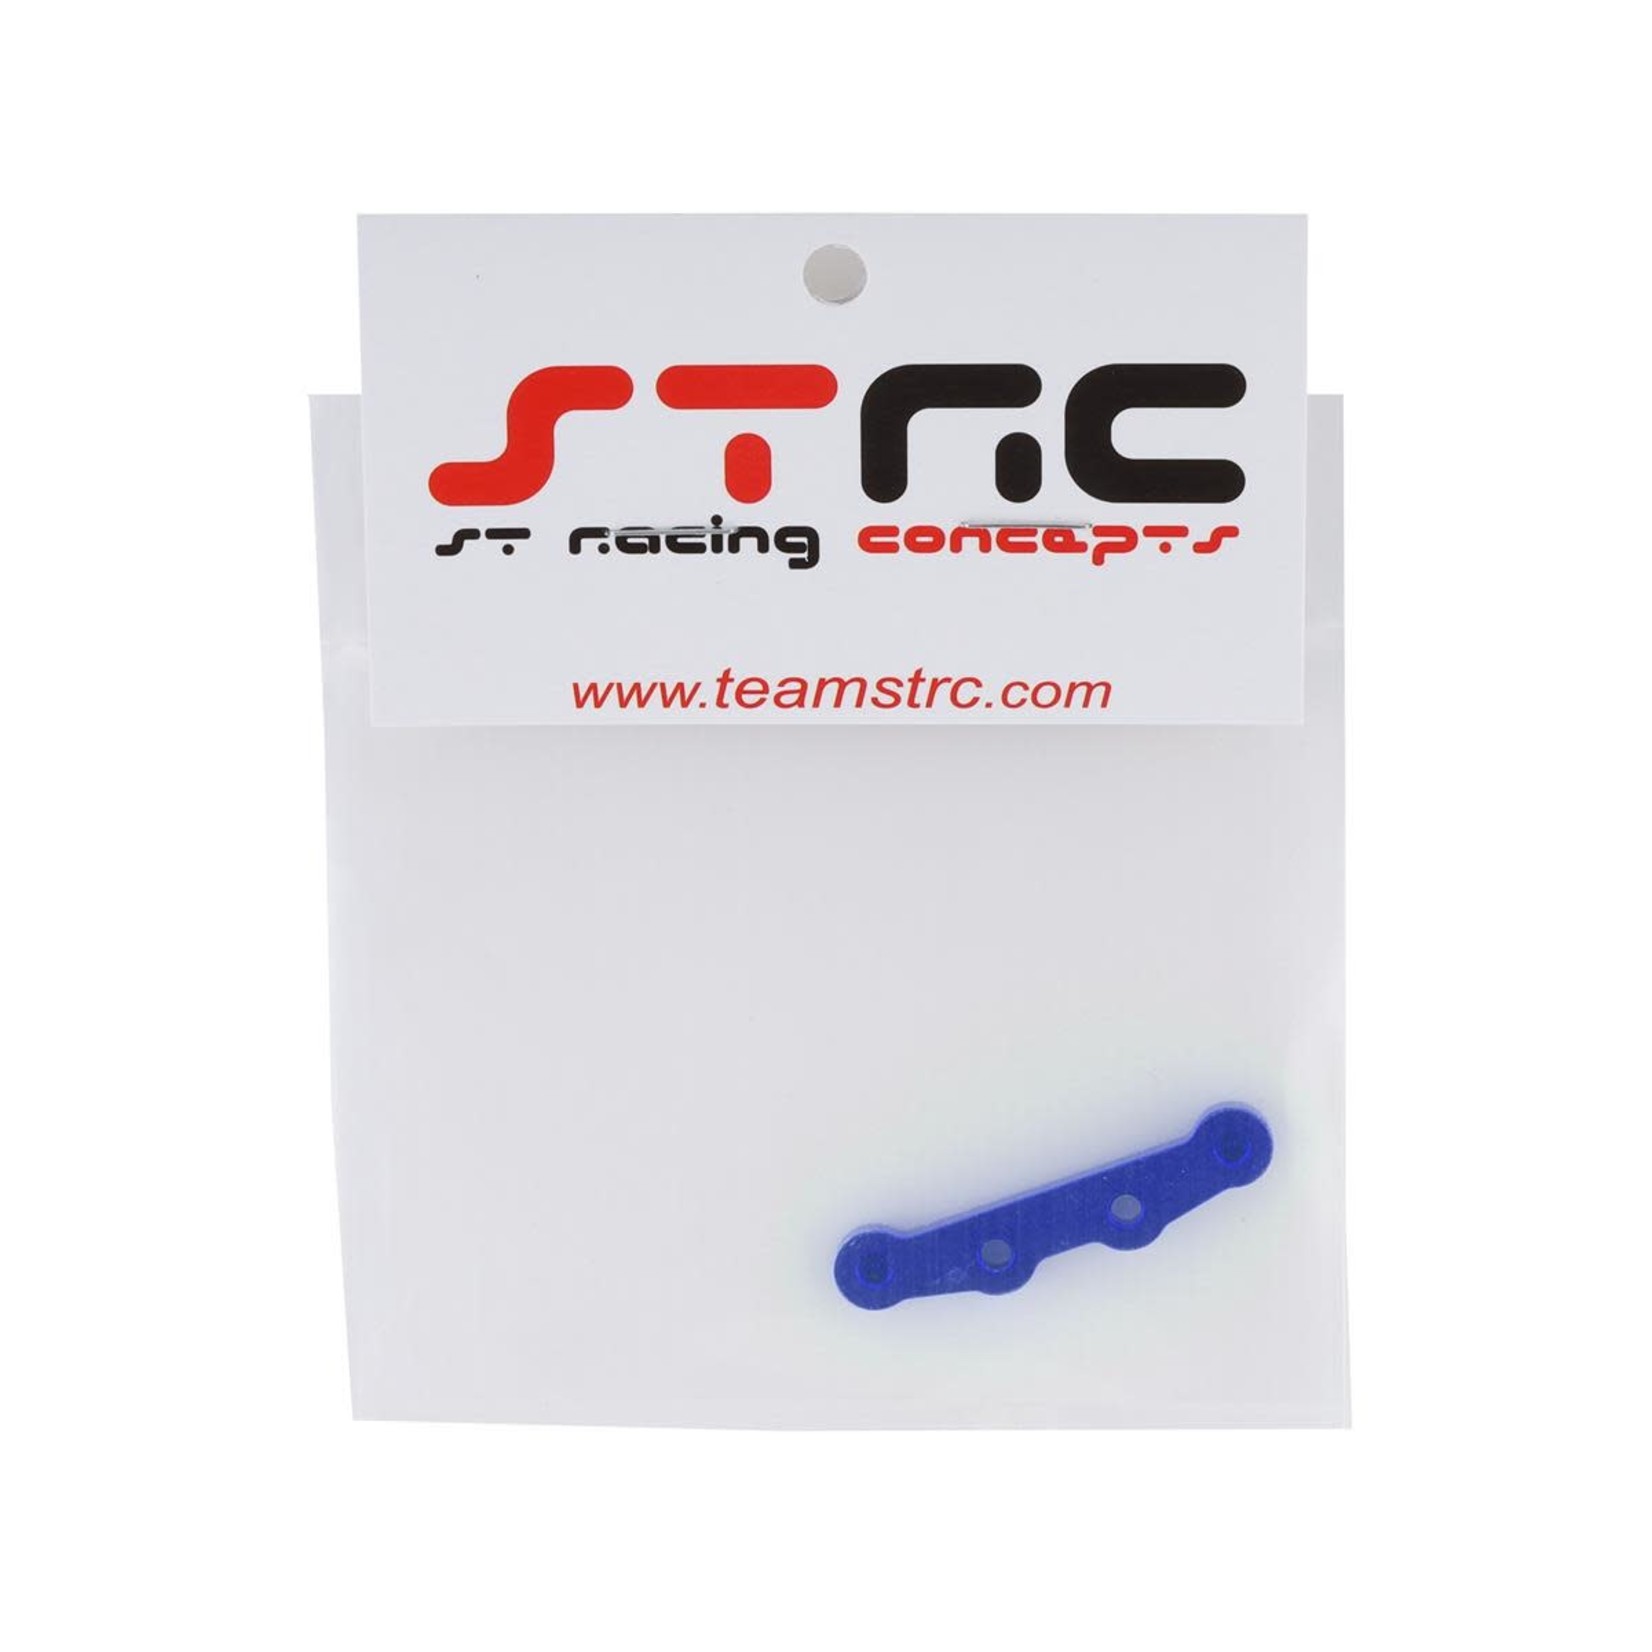 ST Racing Concepts ST Racing Concepts Associated DR10 Aluminum Front Hinge Pin Brace (Blue) #STC71049B